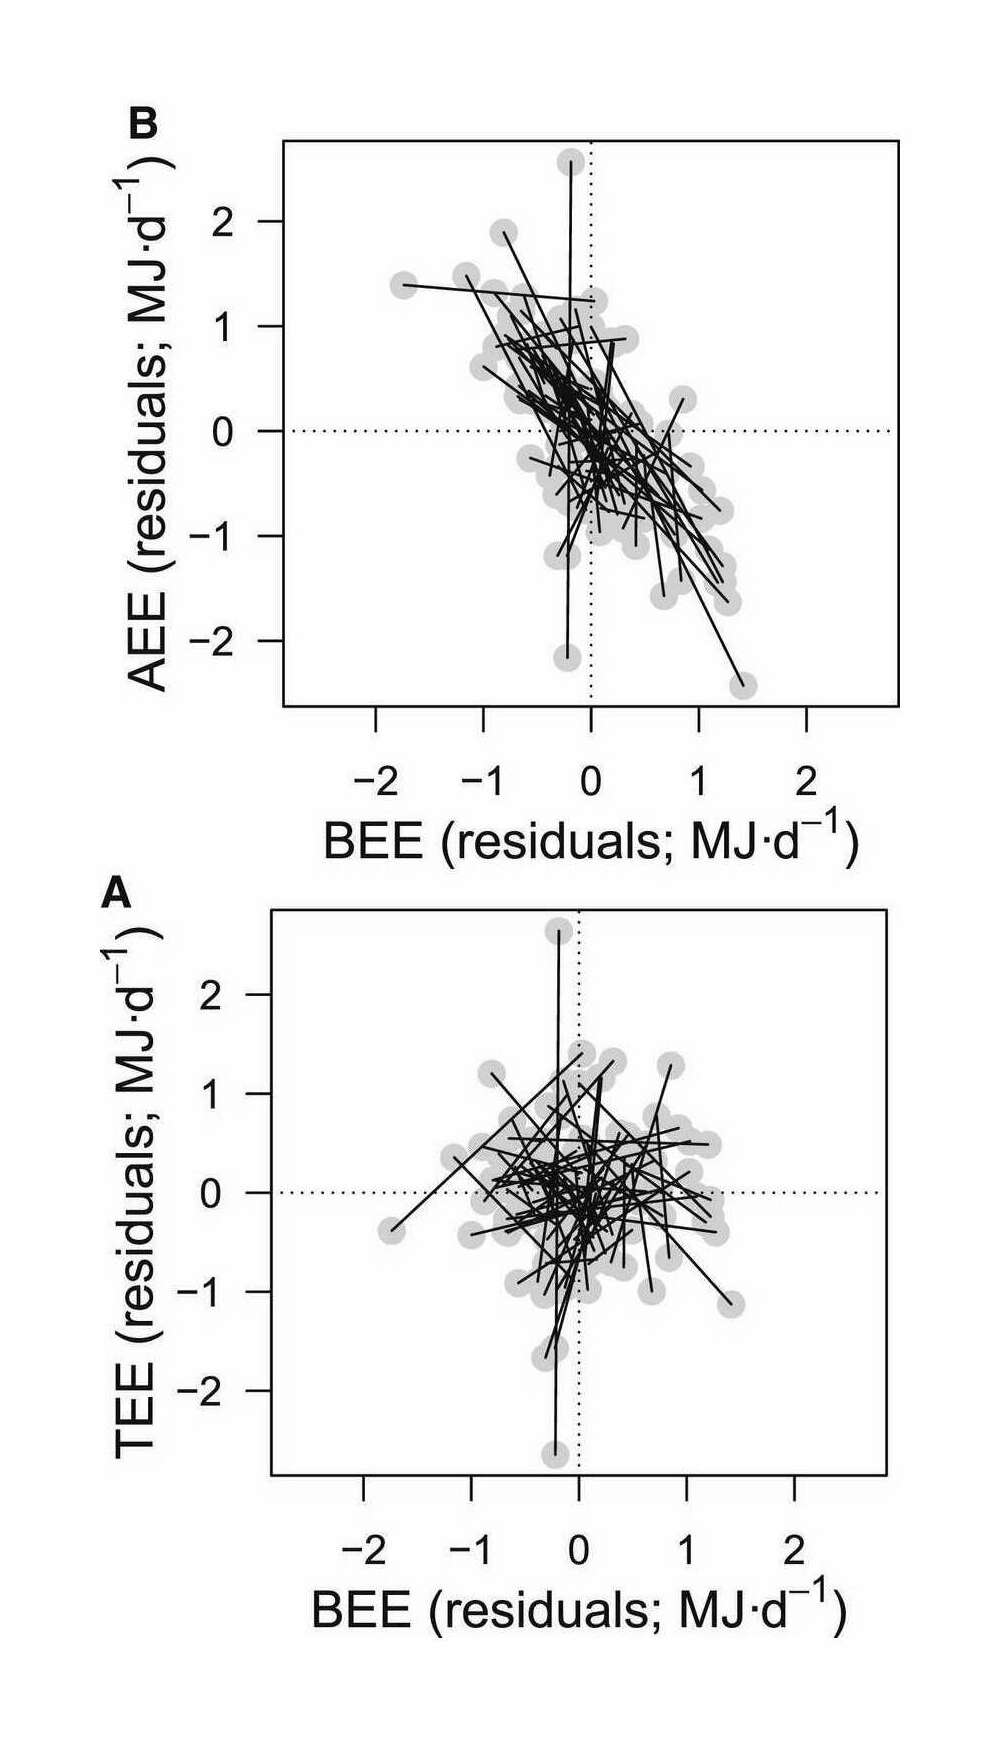 Figure 4: Energy trade-offs within individuals. Residual (A) total energy expenditure (TEE; MJ∙d−1) and (B) activity energy expenditure (AEE; MJ∙d−1) as a function of basal energy expenditure (BEE; MJ∙d−1) in elderly men and women (n = 68) with 2 pairs of TEE-BEE measures each. Within-individual slopes are illustrated by the thin black lines connecting the 2 residual values (gray dots; extracted from the bivariate mixed model; Table S2) for each individual.